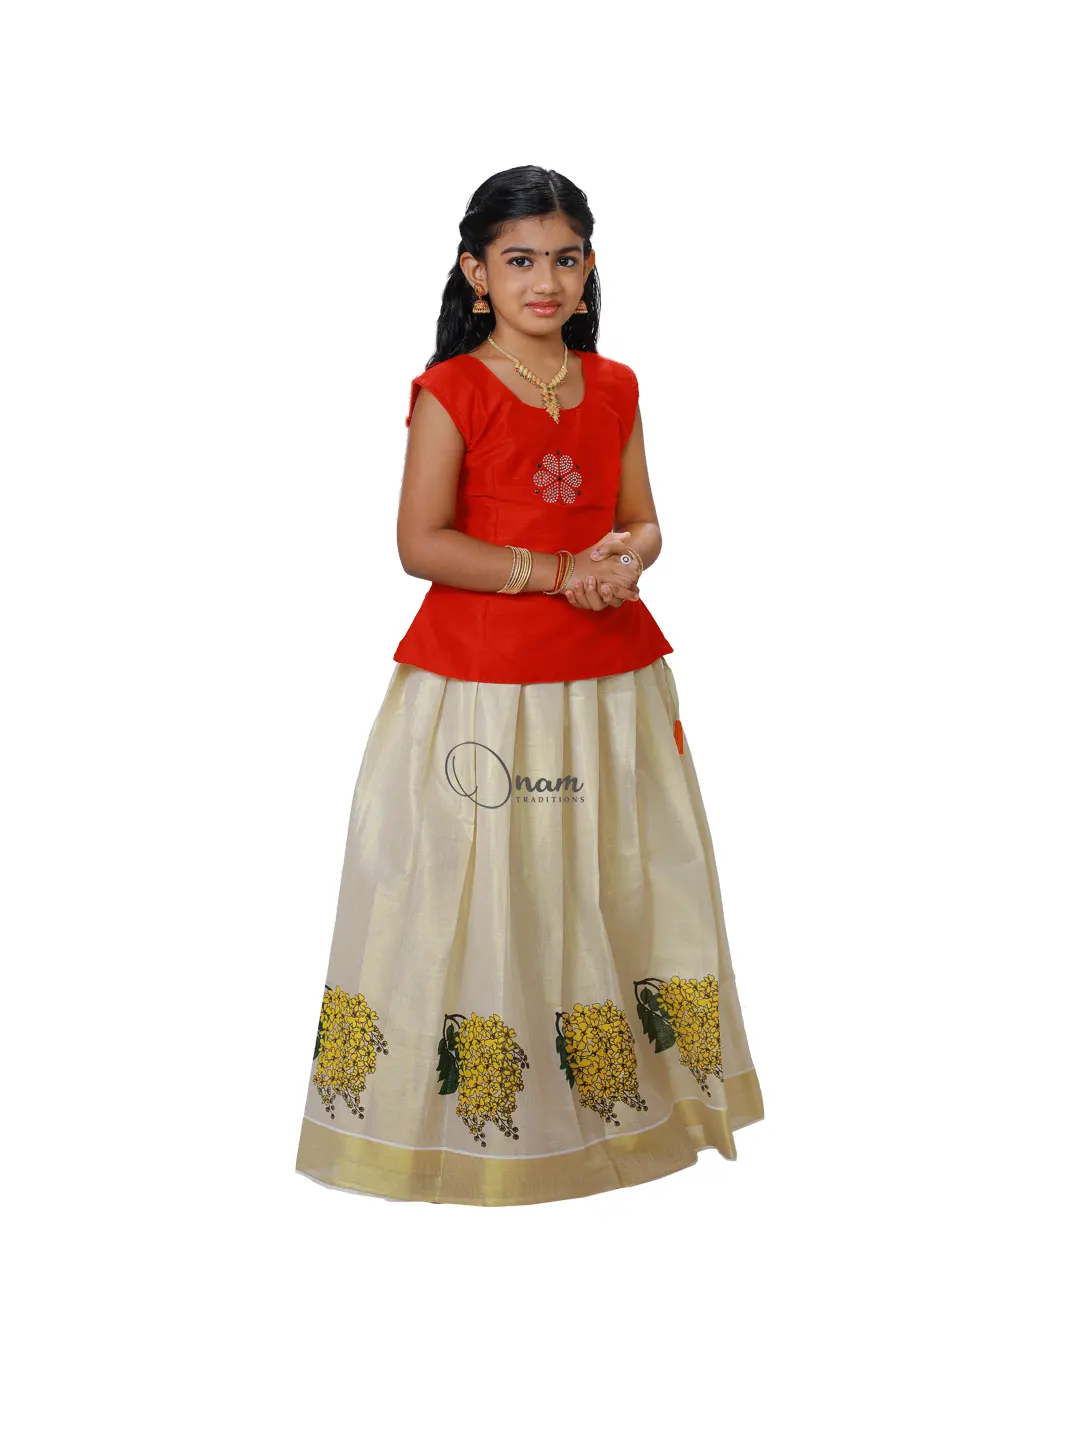 Buy BookMyCostume Kerala Indian State Onam Fancy Dress Costume for Girls  and Females 8-10 years Online at Low Prices in India - Amazon.in